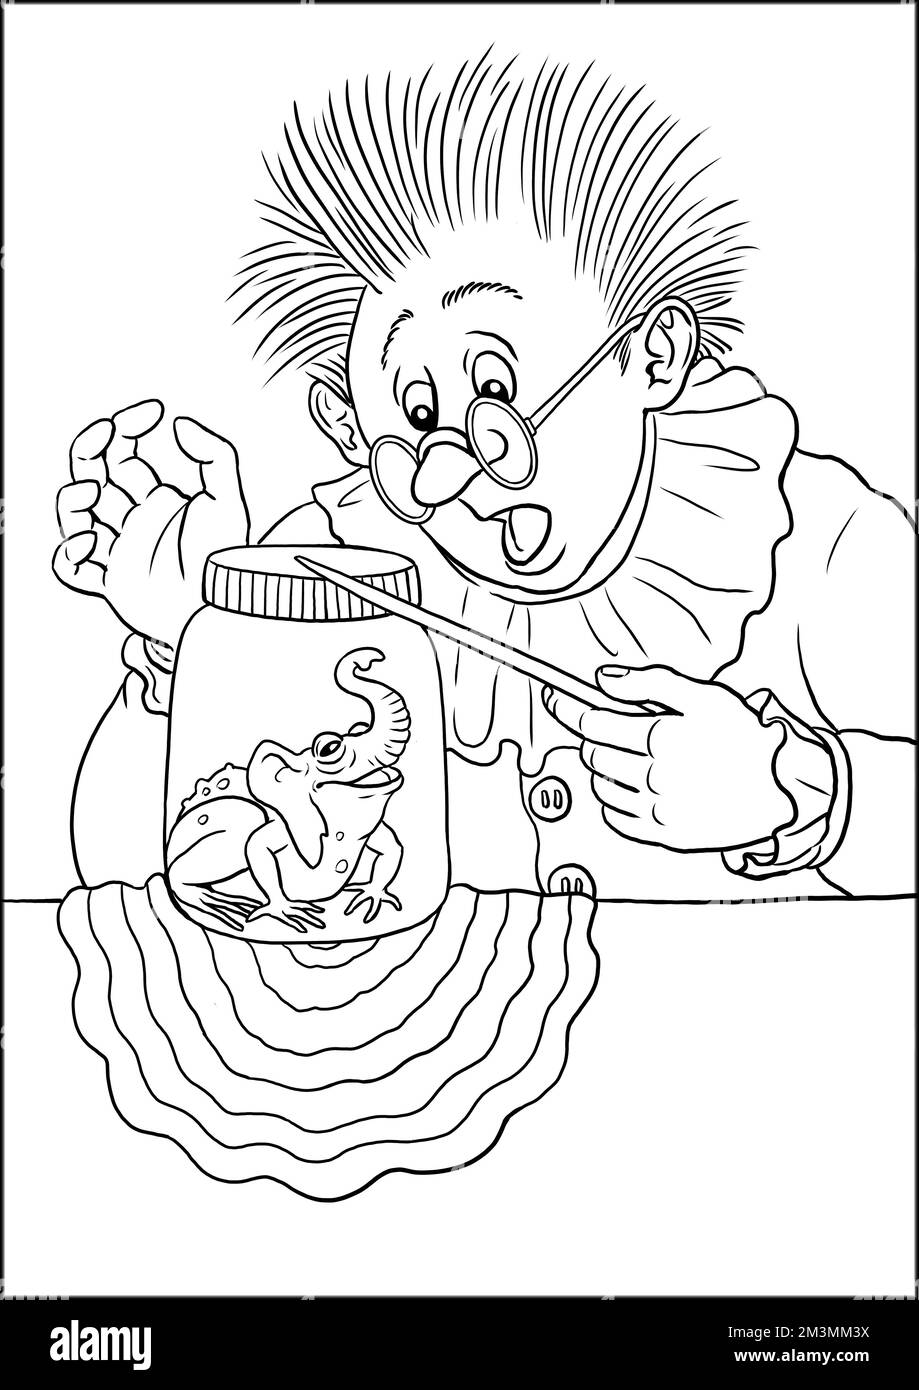 Clumsy Mage. Coloring page with the illusionist. Coloring template with wizard. Stock Photo